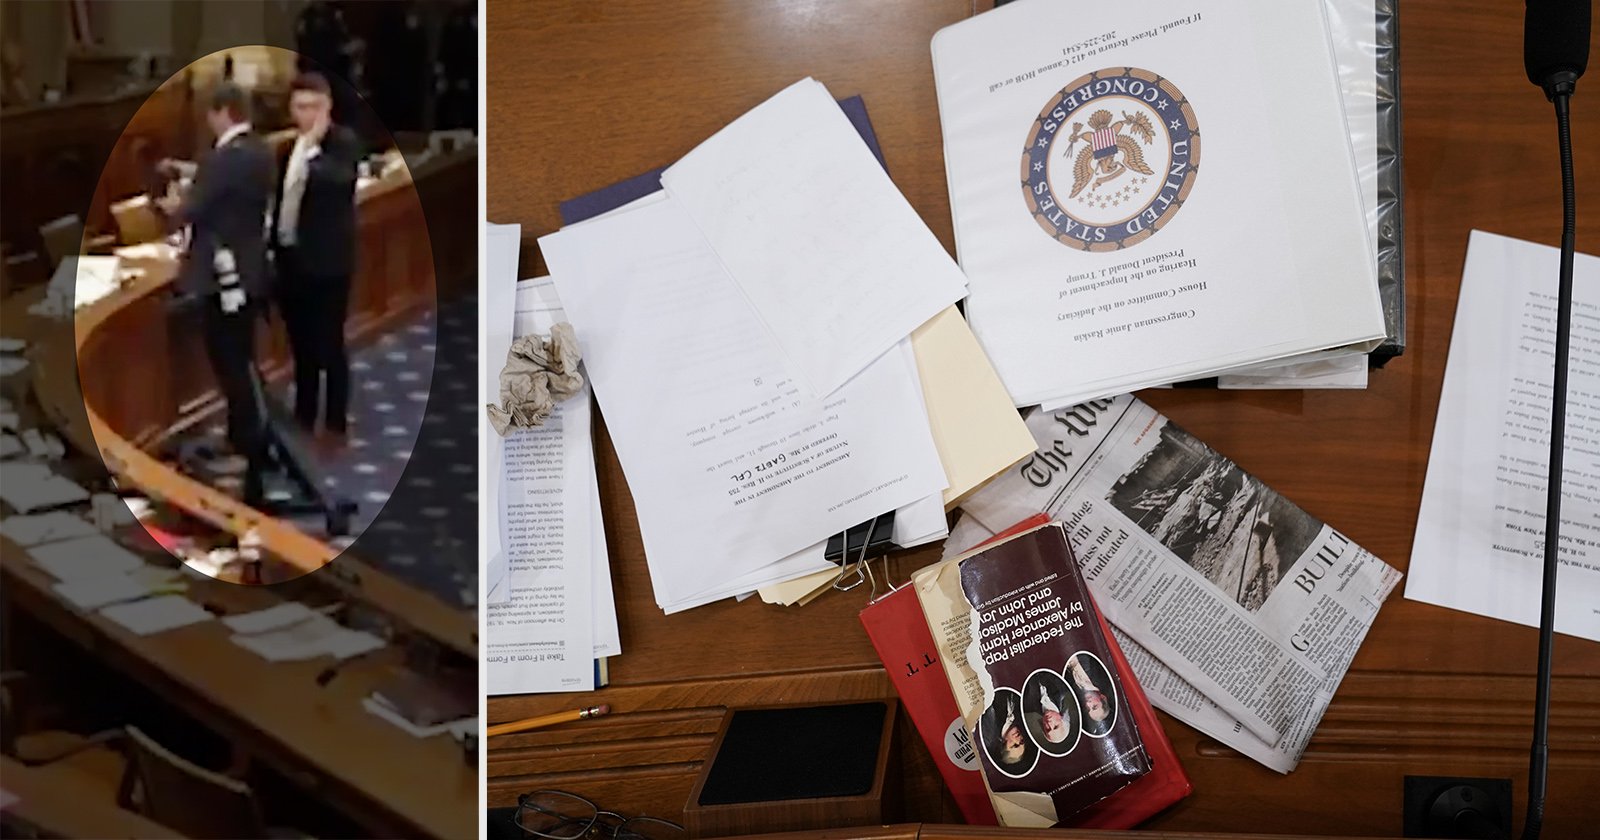 Reuters Photographer Kicked Out of Impeachment Hearing for Taking Photos of Congress Members’ Notes